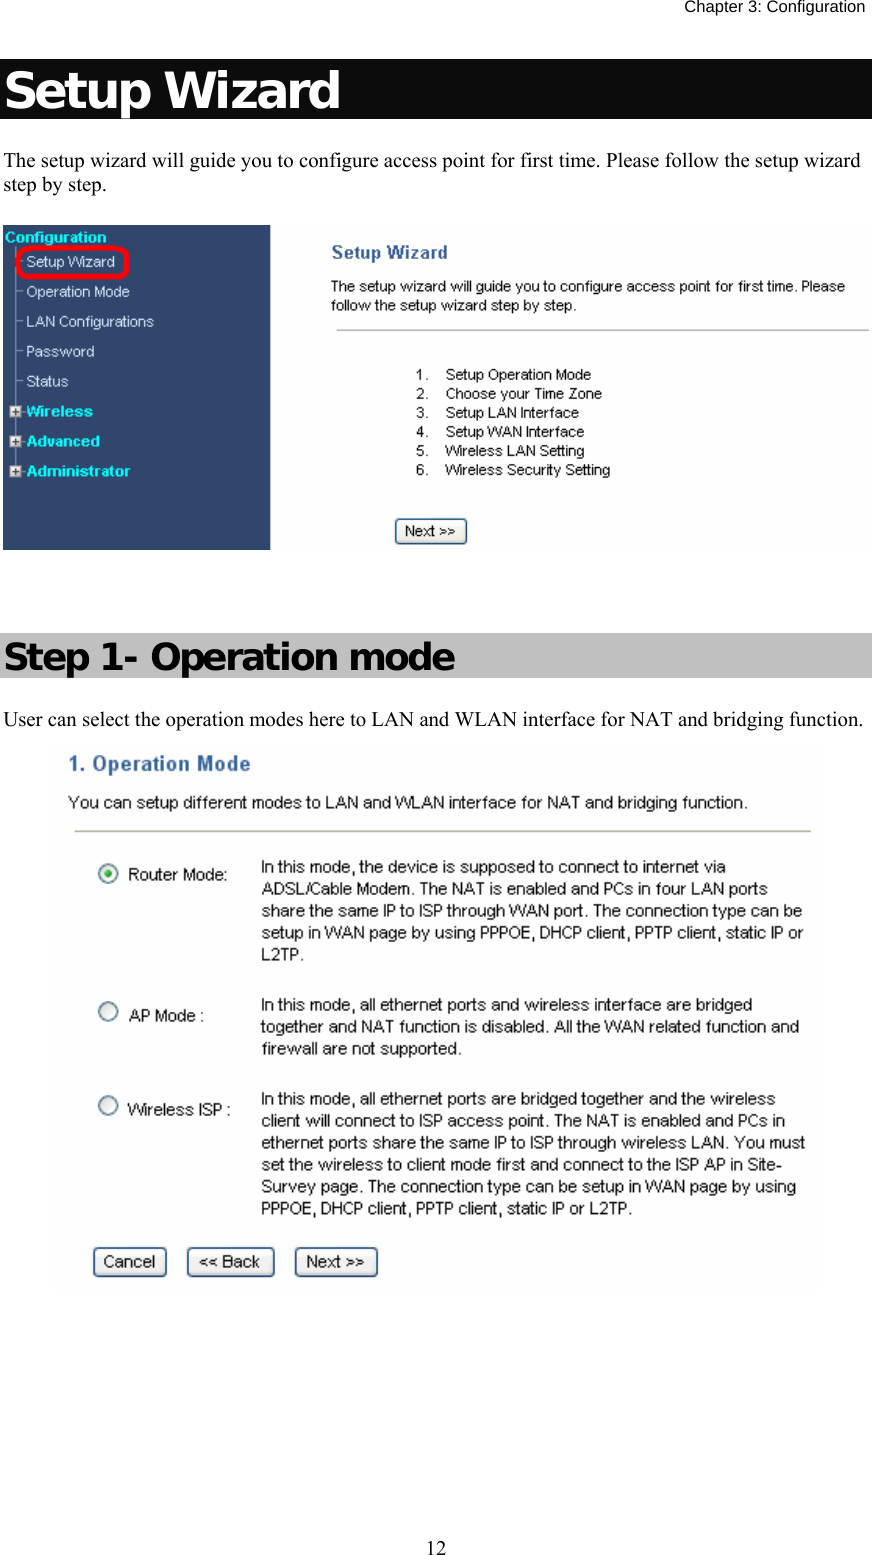   Chapter 3: Configuration  12Setup Wizard The setup wizard will guide you to configure access point for first time. Please follow the setup wizard step by step.   Step 1- Operation mode User can select the operation modes here to LAN and WLAN interface for NAT and bridging function.     